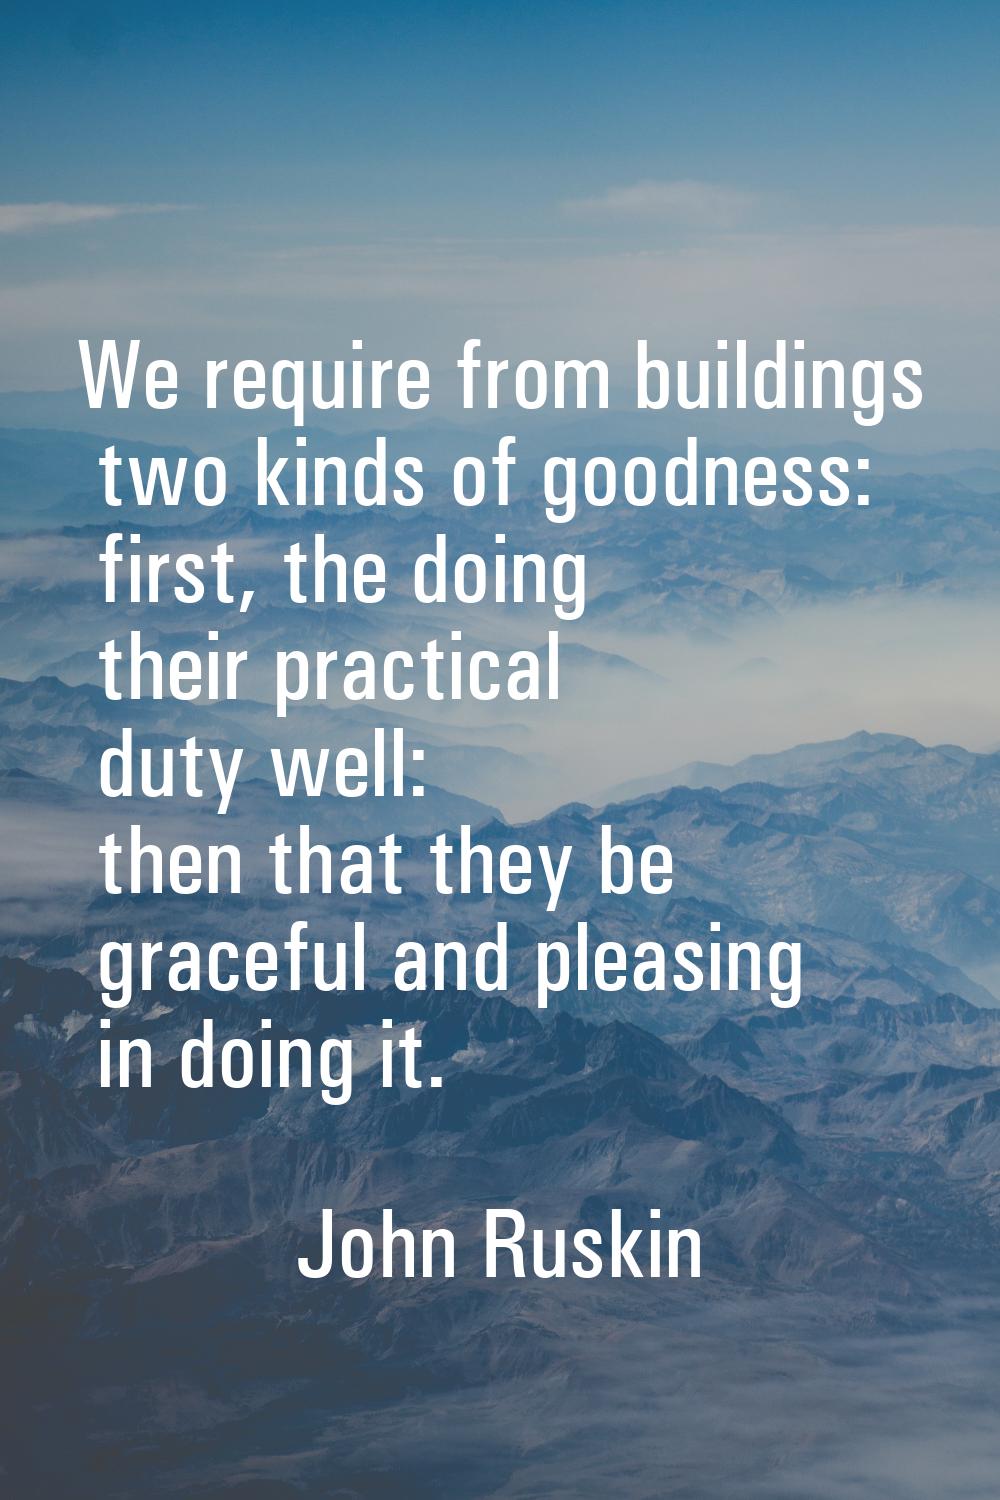 We require from buildings two kinds of goodness: first, the doing their practical duty well: then t